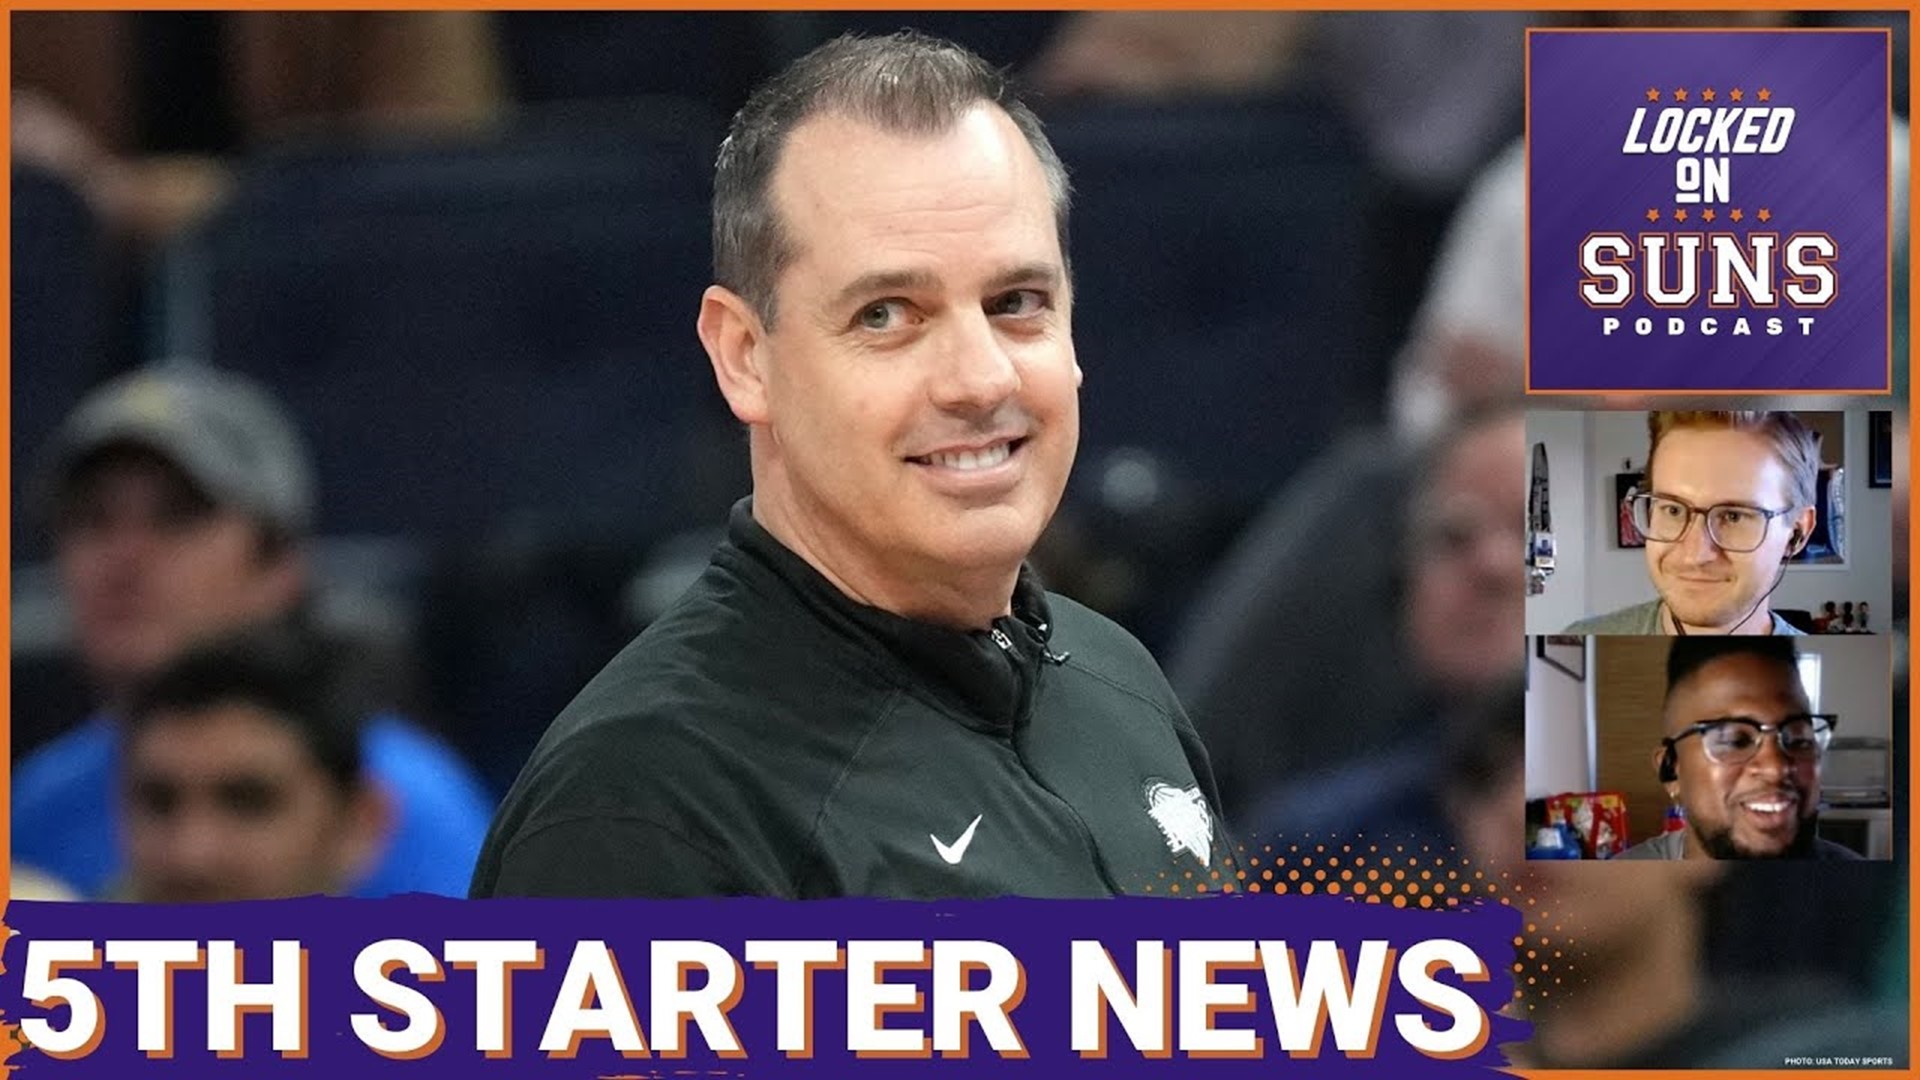 The Phoenix Suns will rotate players into their starting lineup according to head coach Frank Vogel.